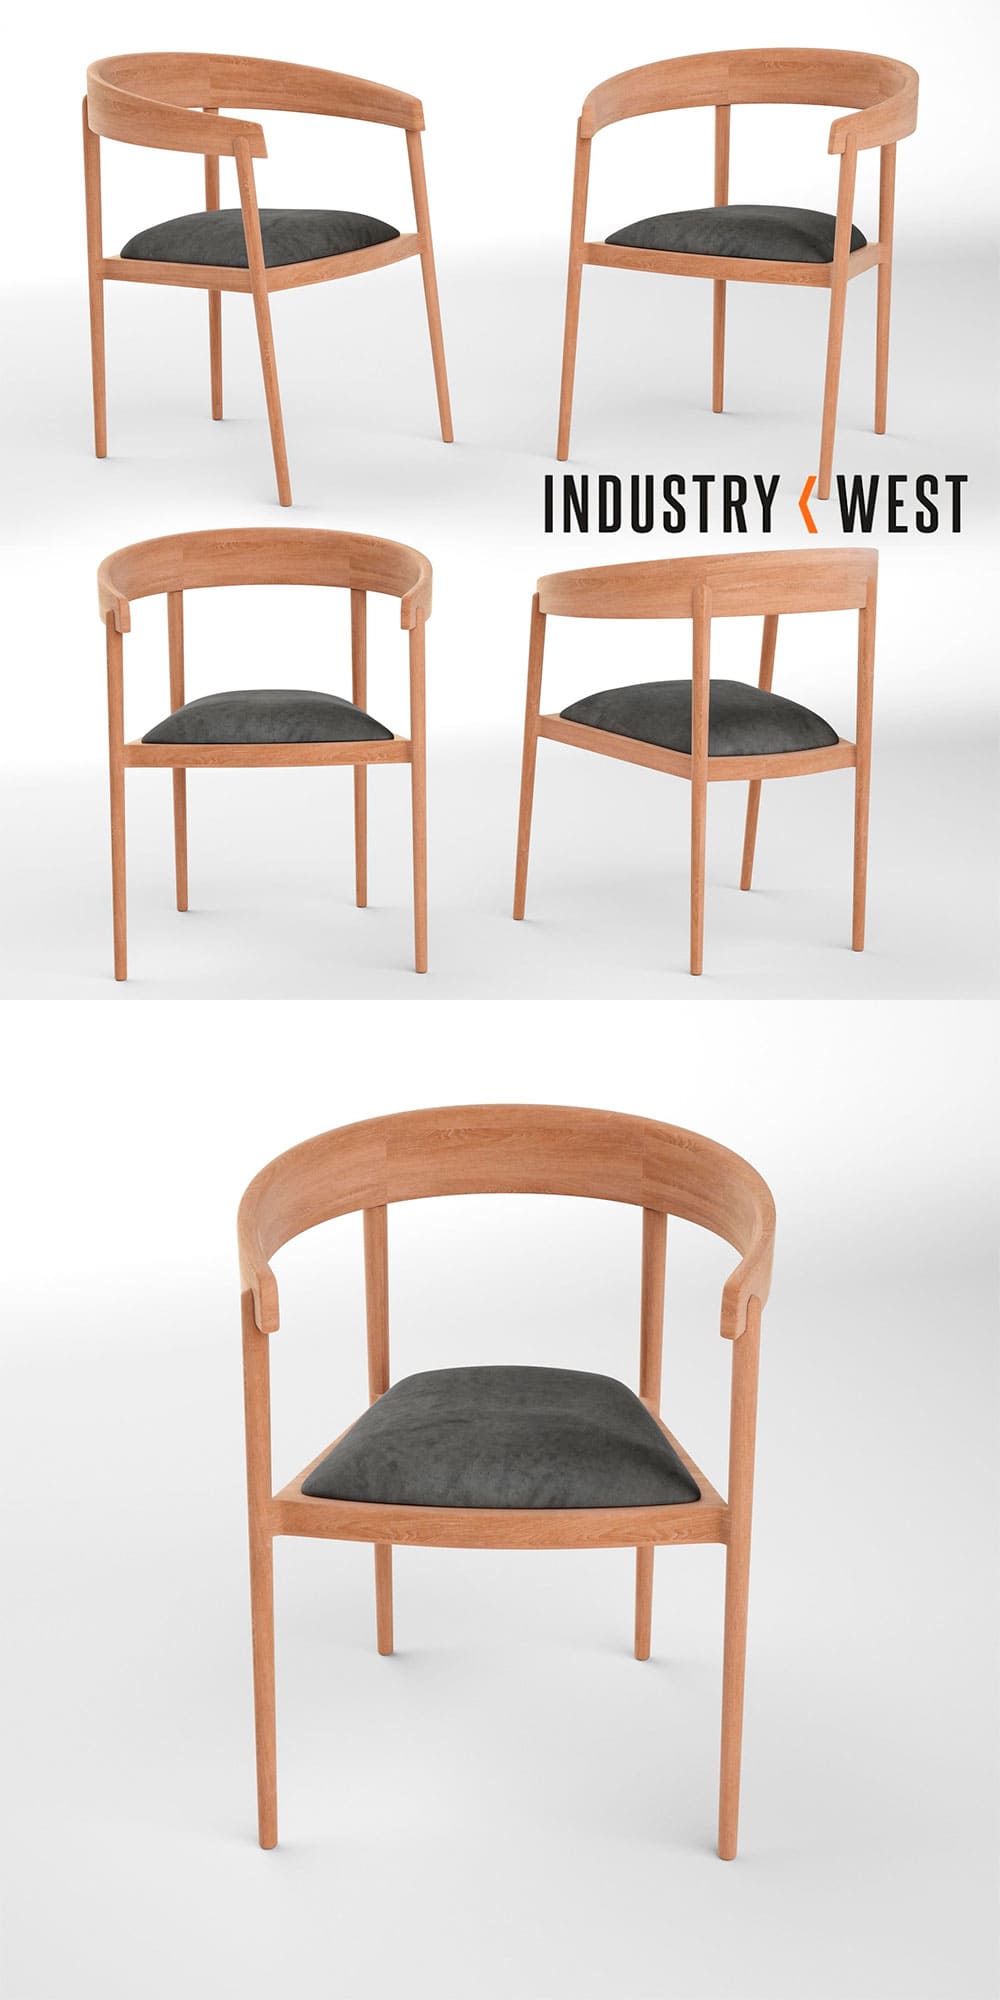 George armchair industry west, picture for pinterest.